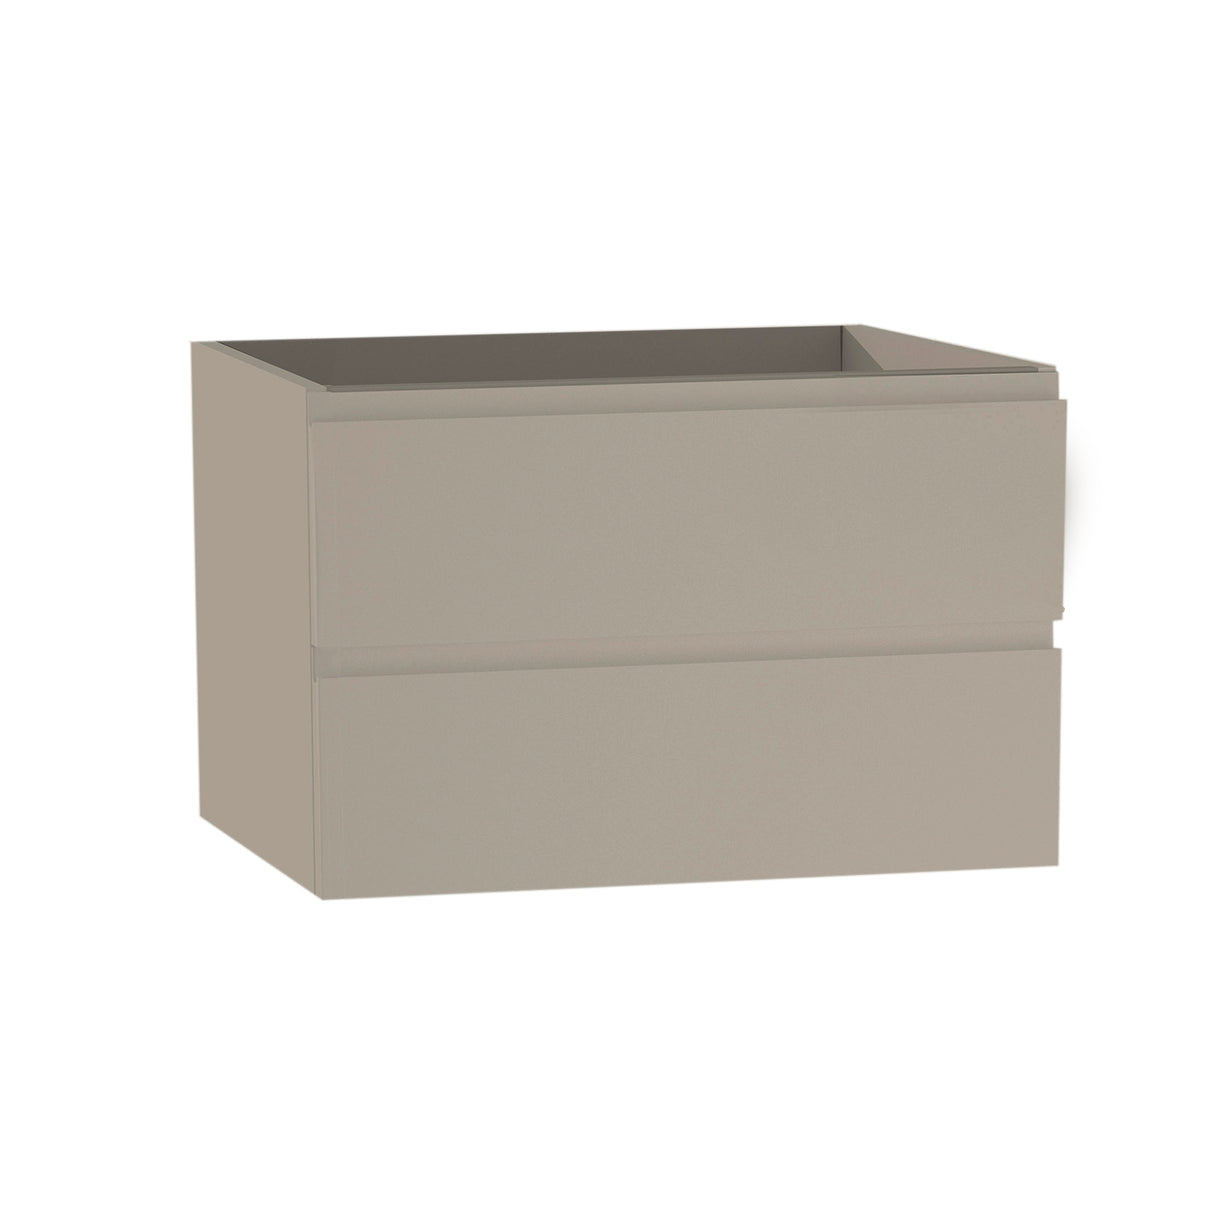 DAX Pasadena Engineered Wood and Porcelain Onix Basin with Single Vanity Cabinet, 28", Matte Mink DAX-PAS012874-ONX